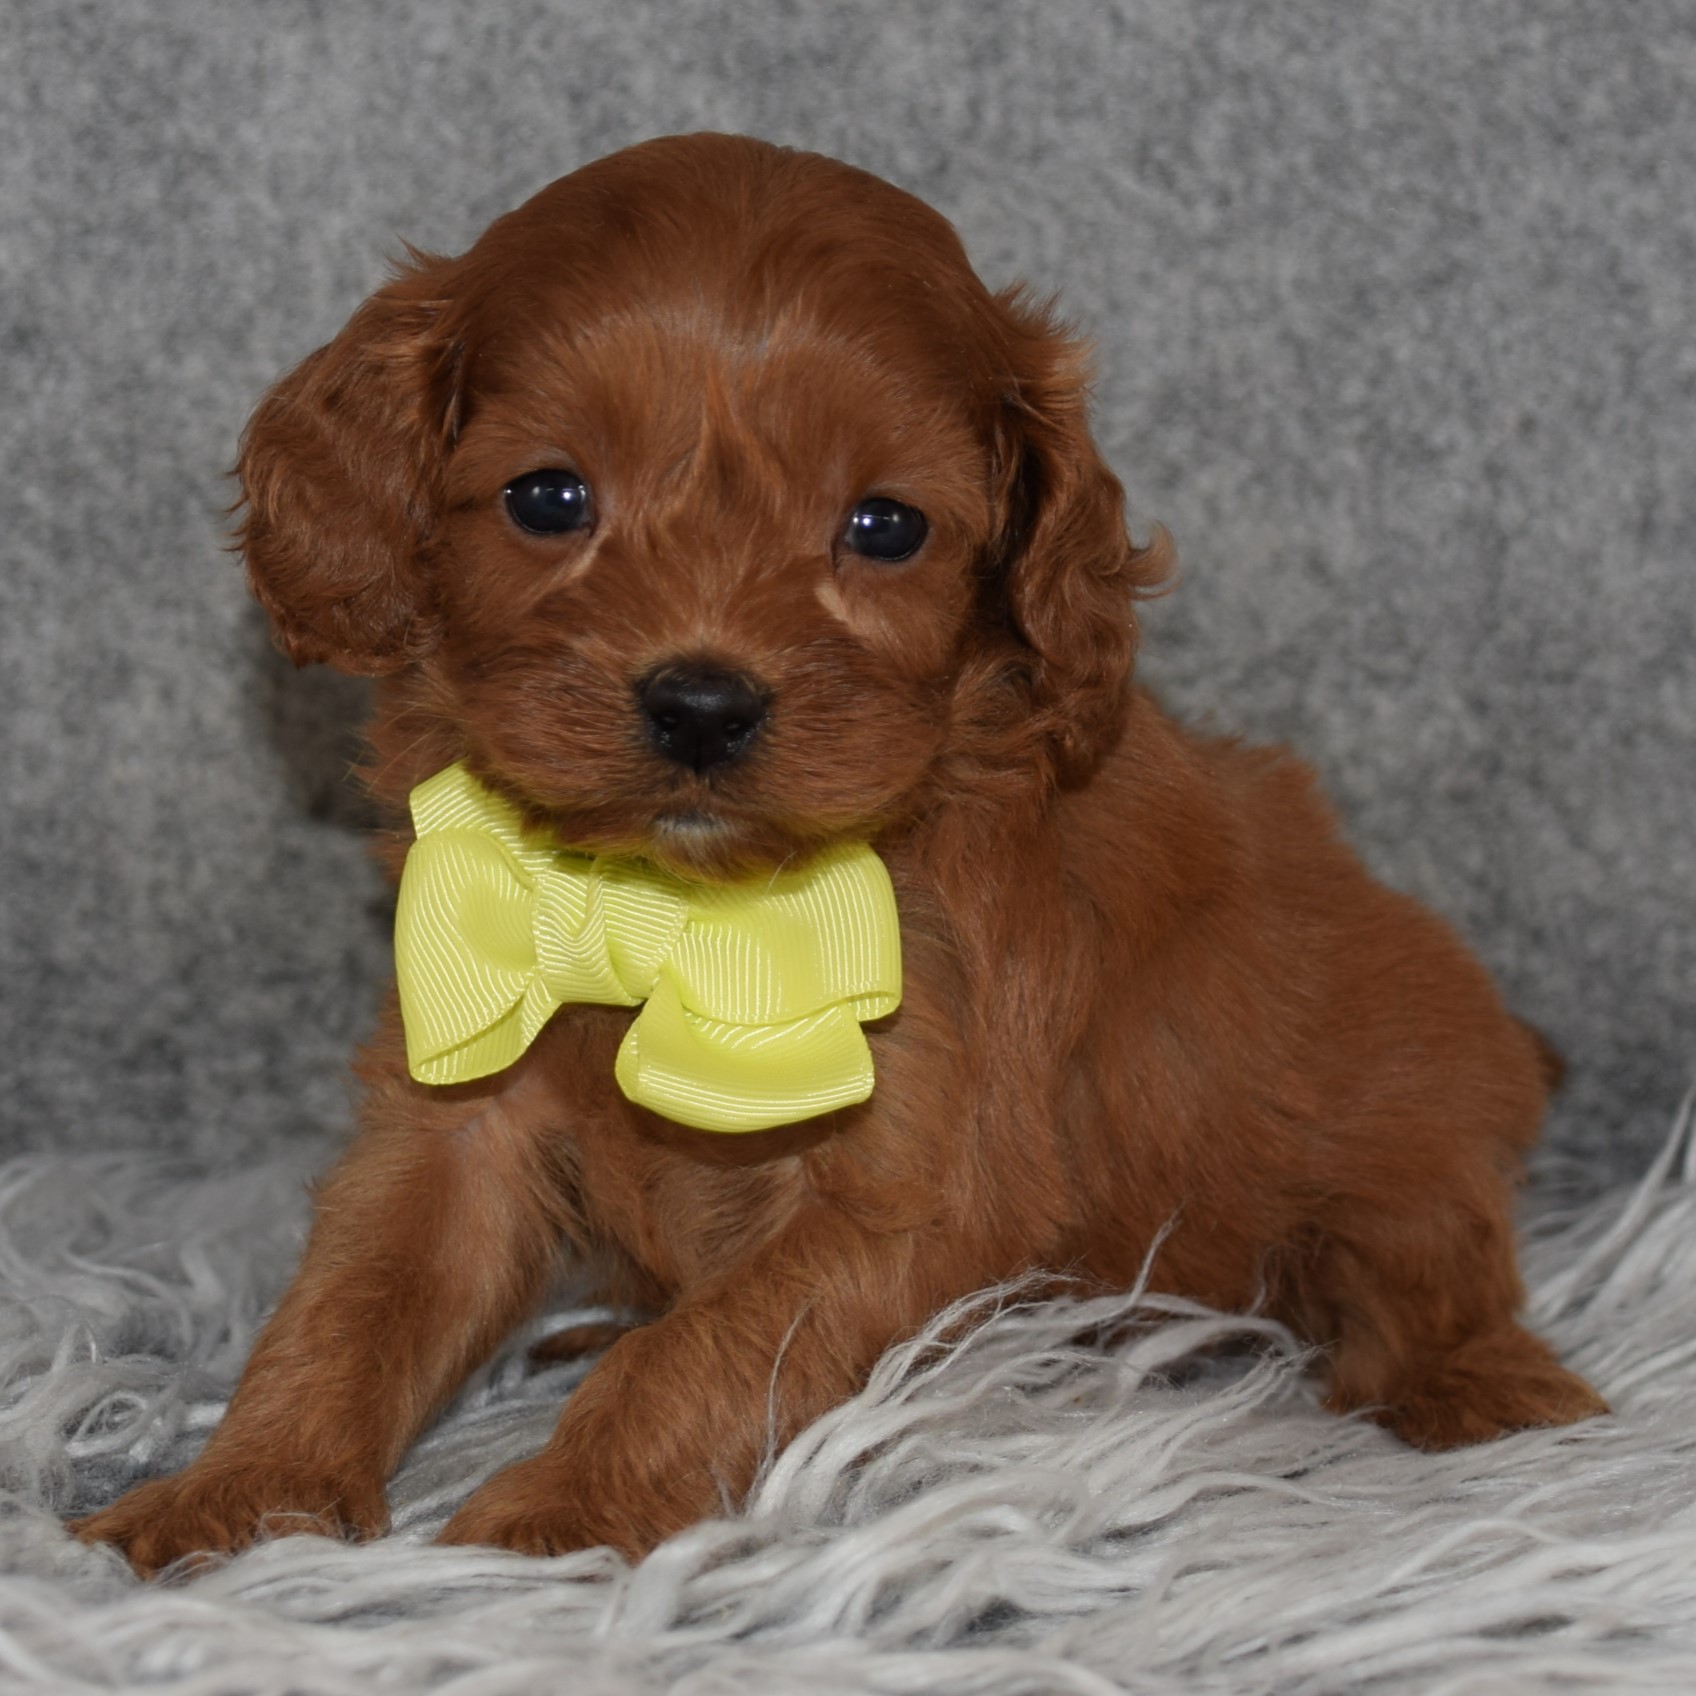 Cavapoo Puppy For Sale – Asparagus, Male – Deposit Only